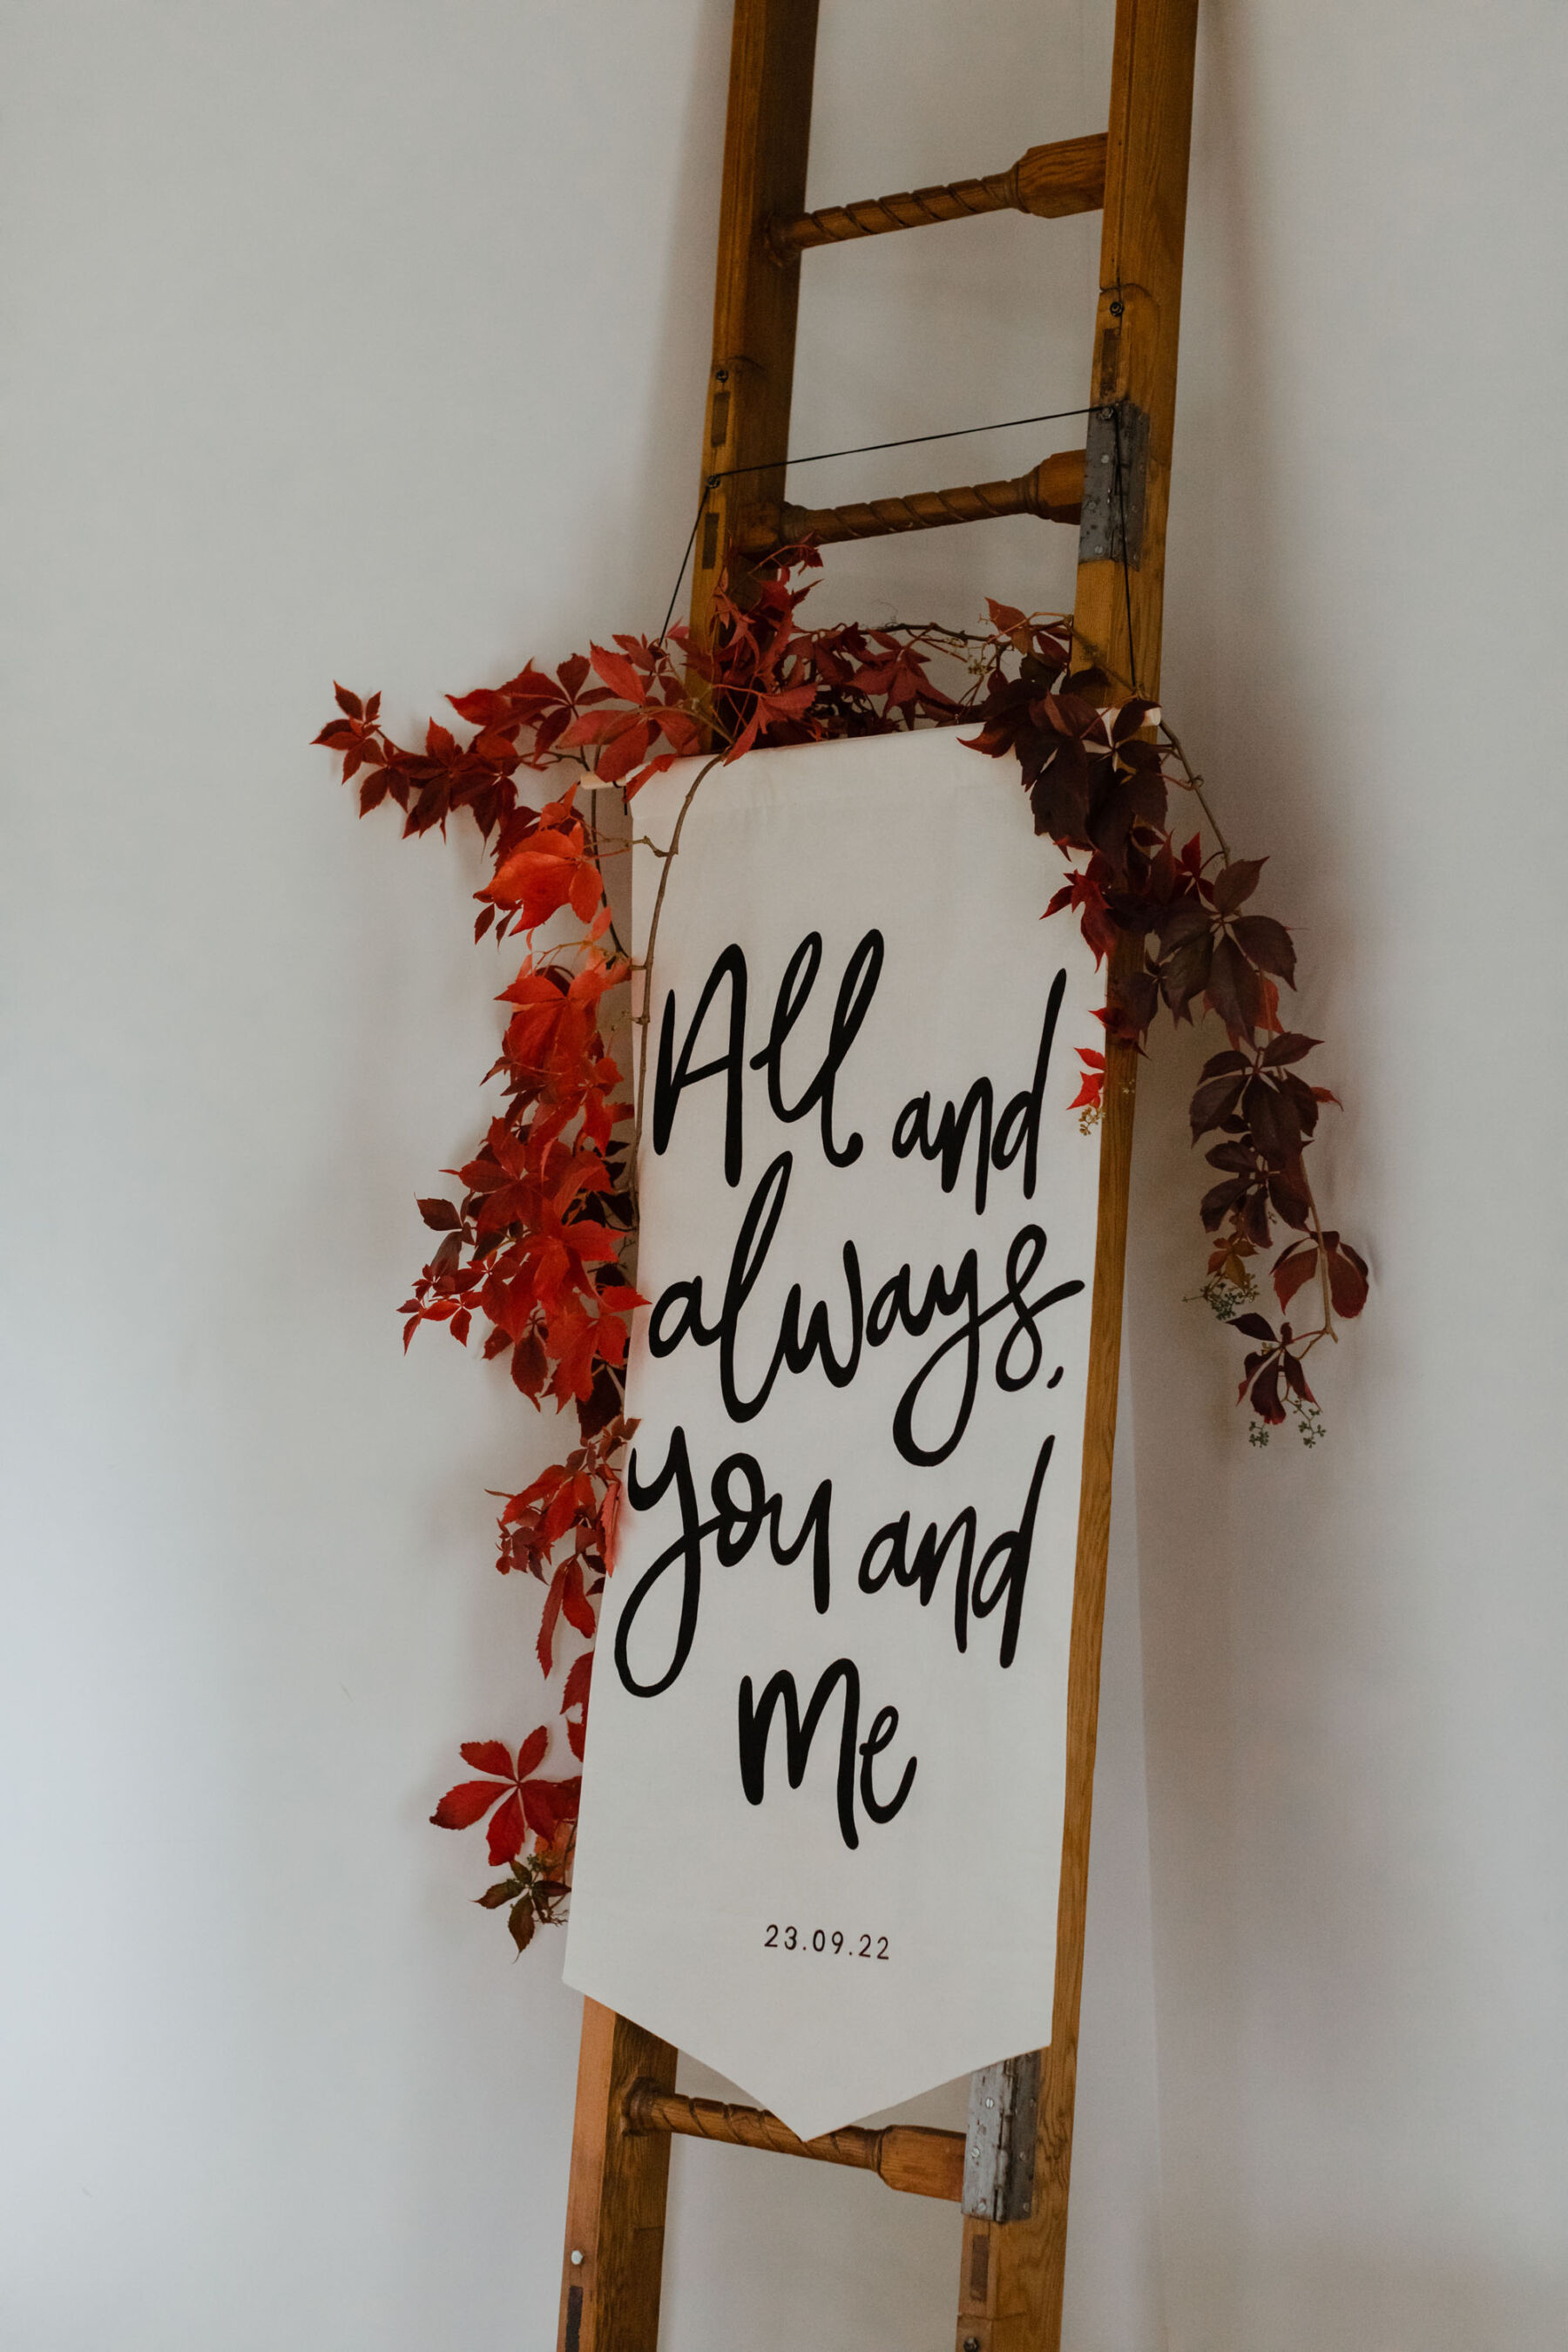 All and always you and me wedding banner